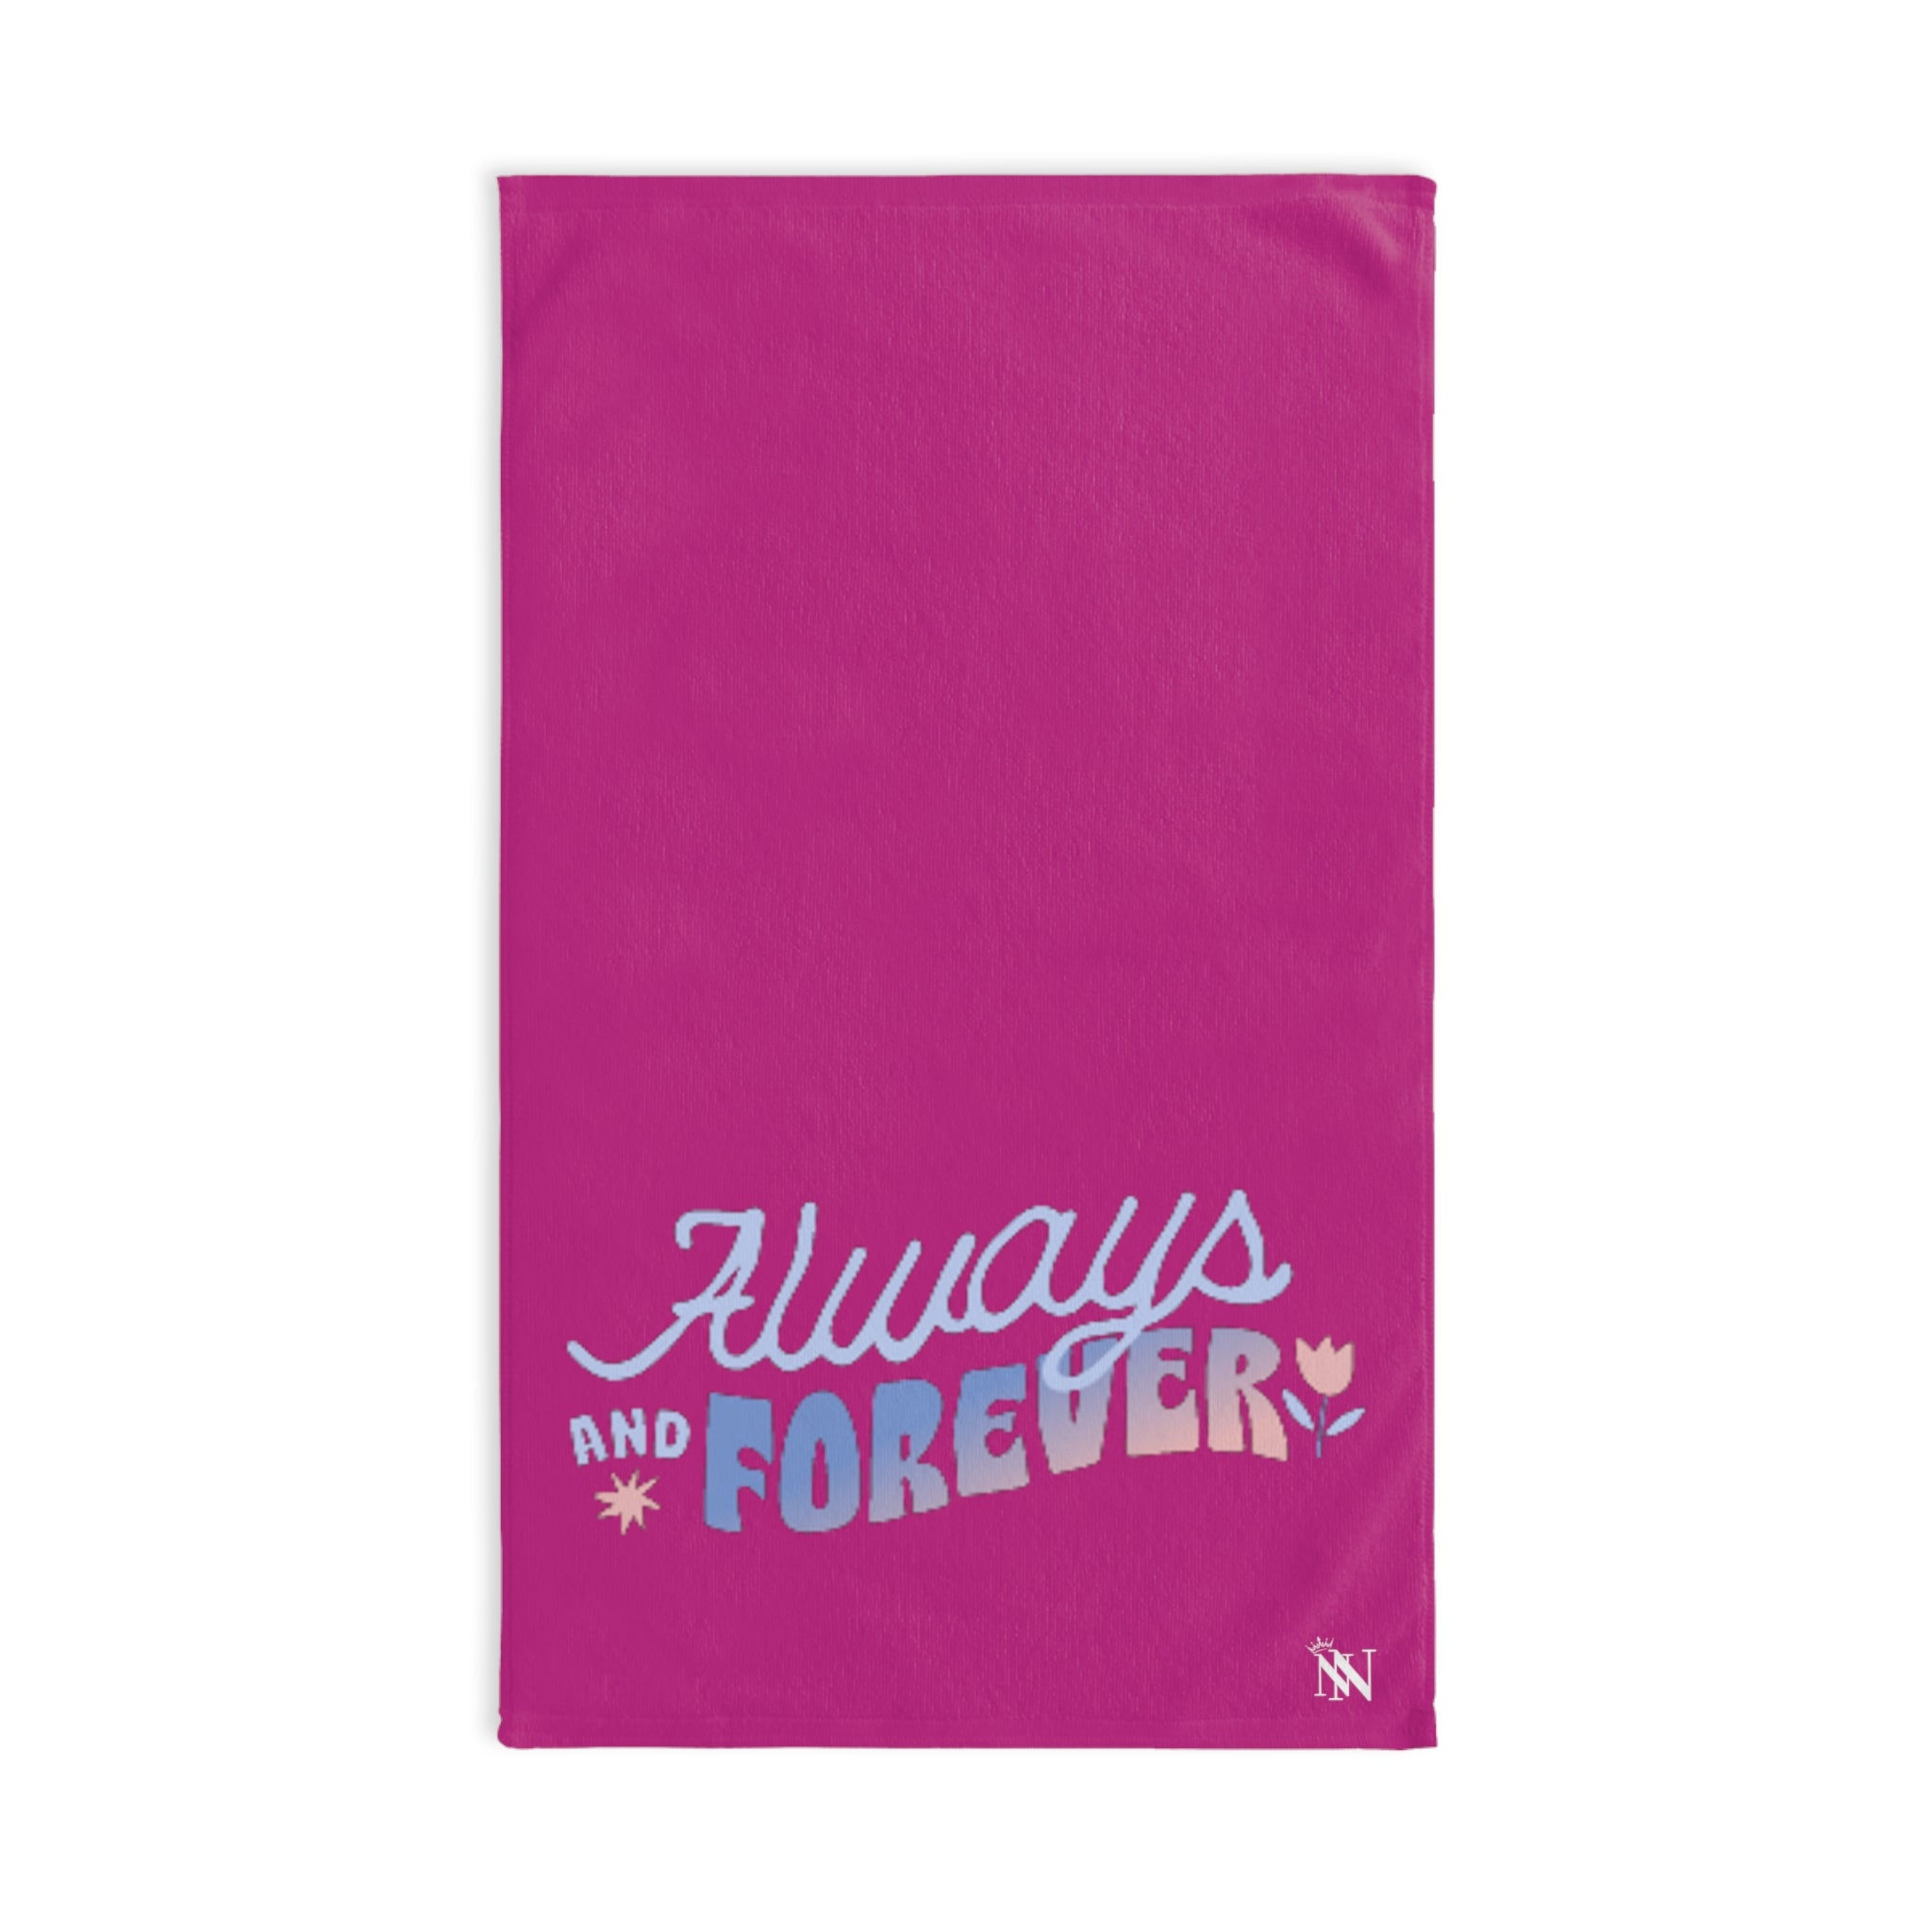 Always and Forever Fuscia | Funny Gifts for Men - Gifts for Him - Birthday Gifts for Men, Him, Husband, Boyfriend, New Couple Gifts, Fathers & Valentines Day Gifts, Hand Towels NECTAR NAPKINS